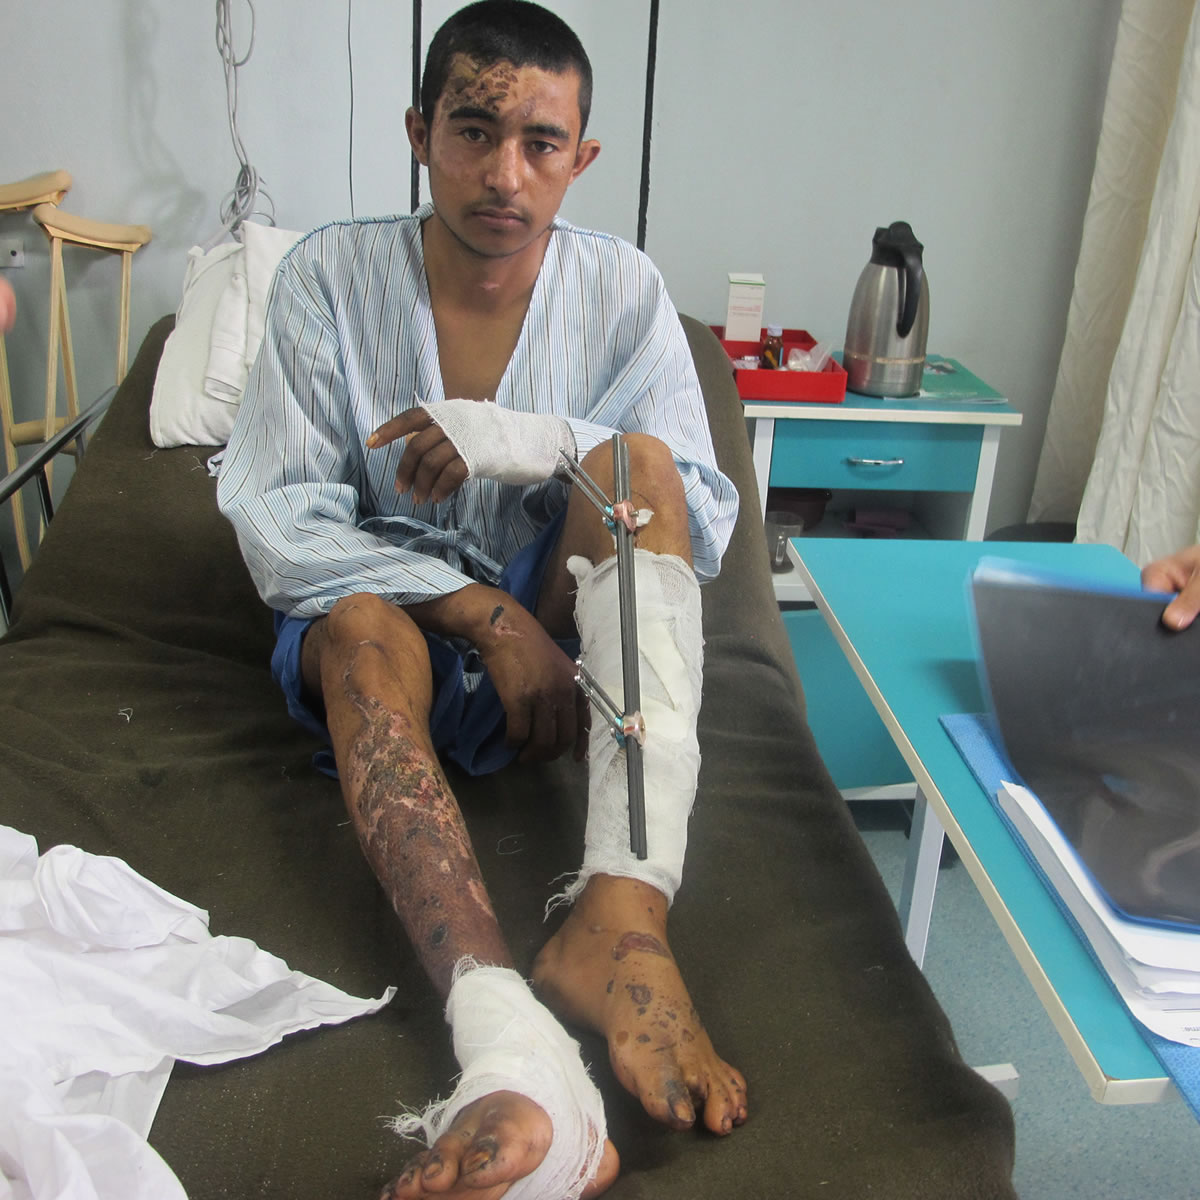 Khal Nazar Aziz, an Afghan police officer who was injured by an IED, or improvised explosive device, recovers on Feb. 12 in a military hospital in Mazar-e-Sharif, Afghanistan.